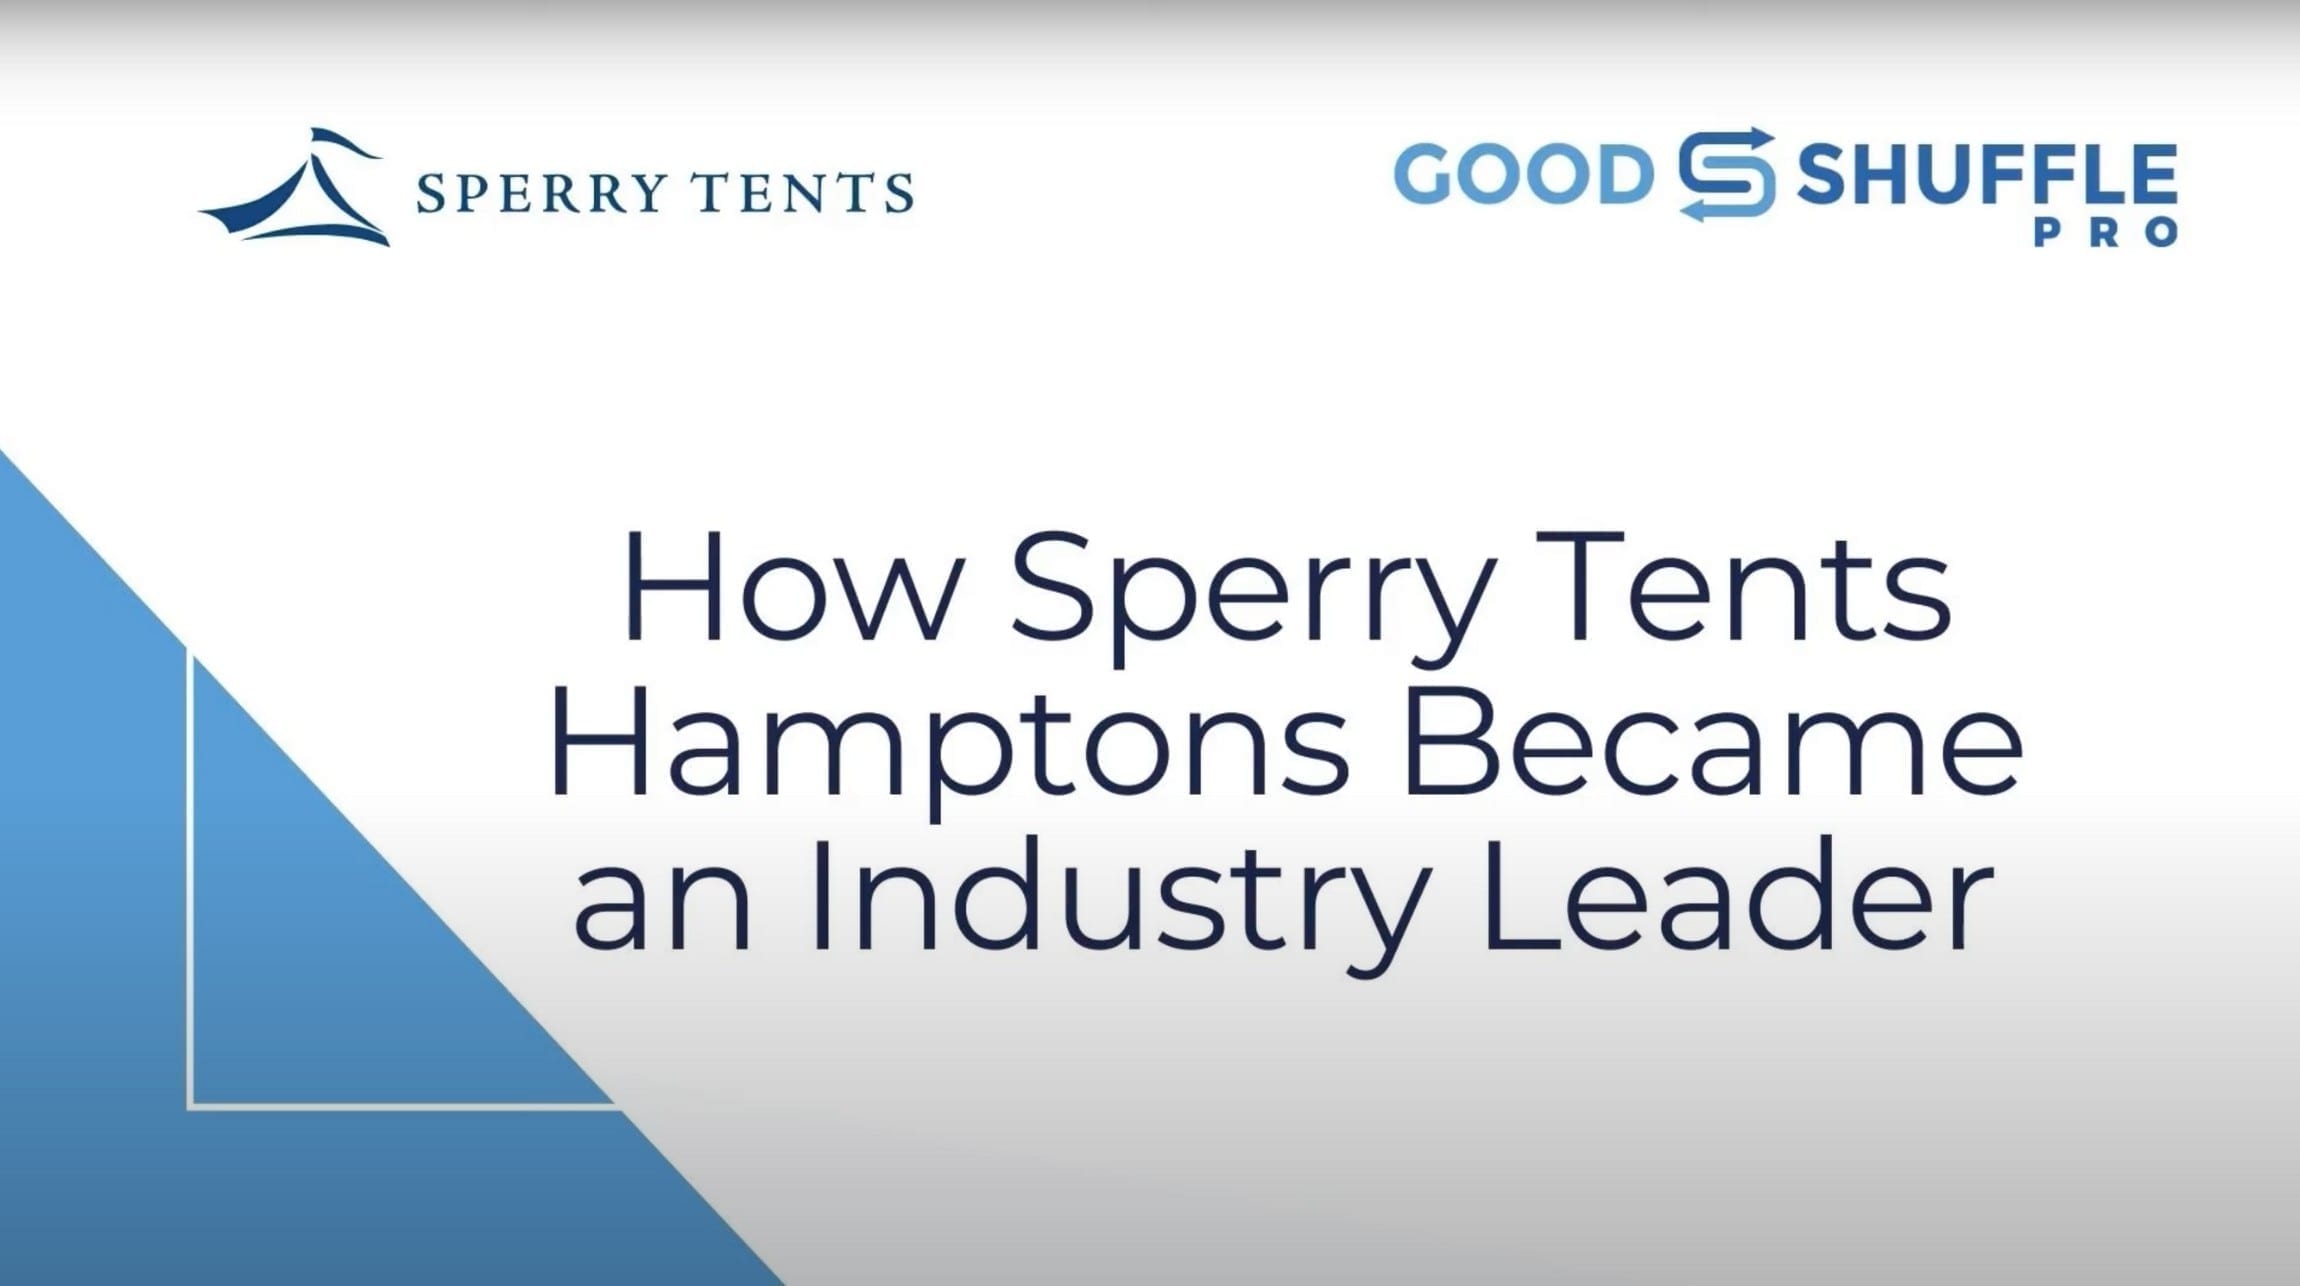 How Sperry Tents Hamptons Became an Industry Leader webinar